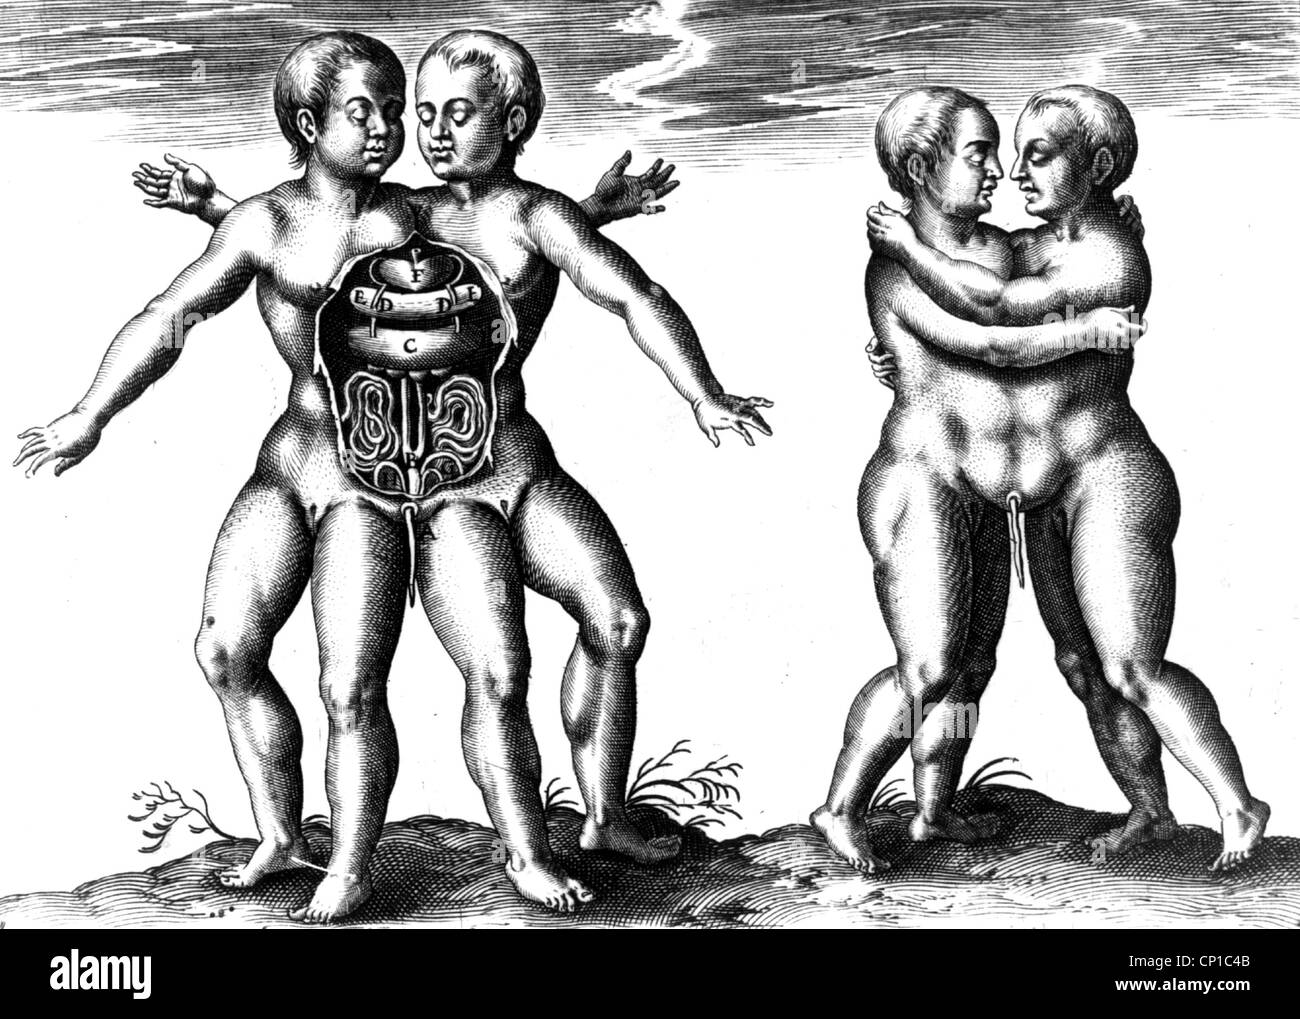 medicine, anomalies, Siamese twins, open corpus with bowels, copper engraving, 18th century, historic, historical, misshapen, genetic defect, genetic defects, twin, anomaly, people, umbilical cord, heart, intestine, intestines, Additional-Rights-Clearences-Not Available Stock Photo